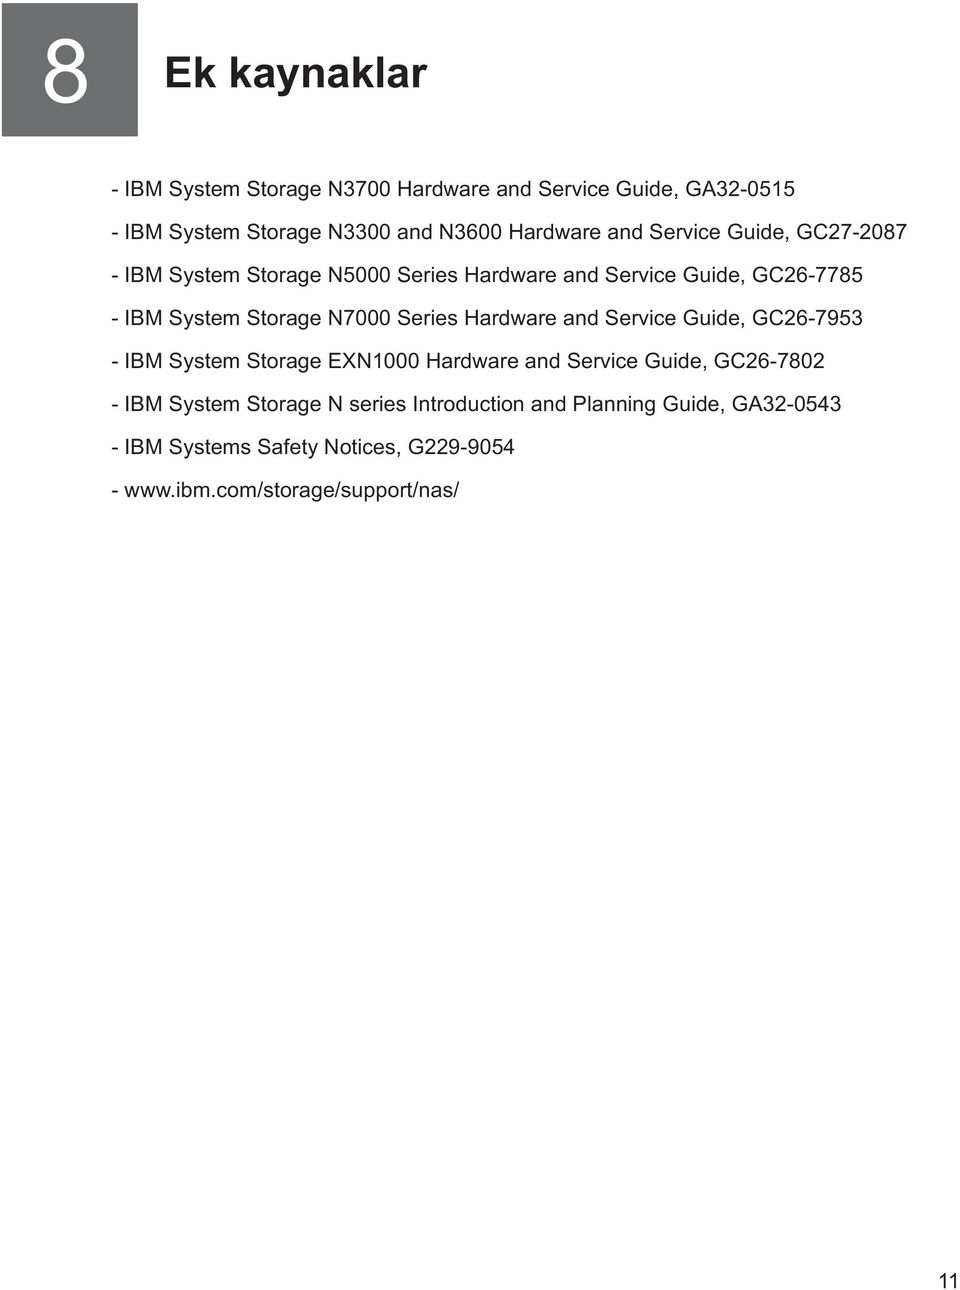 Series Hardware and Service Guide, GC26-7953 - IBM System Storage EXN1000 Hardware and Service Guide, GC26-7802 - IBM System